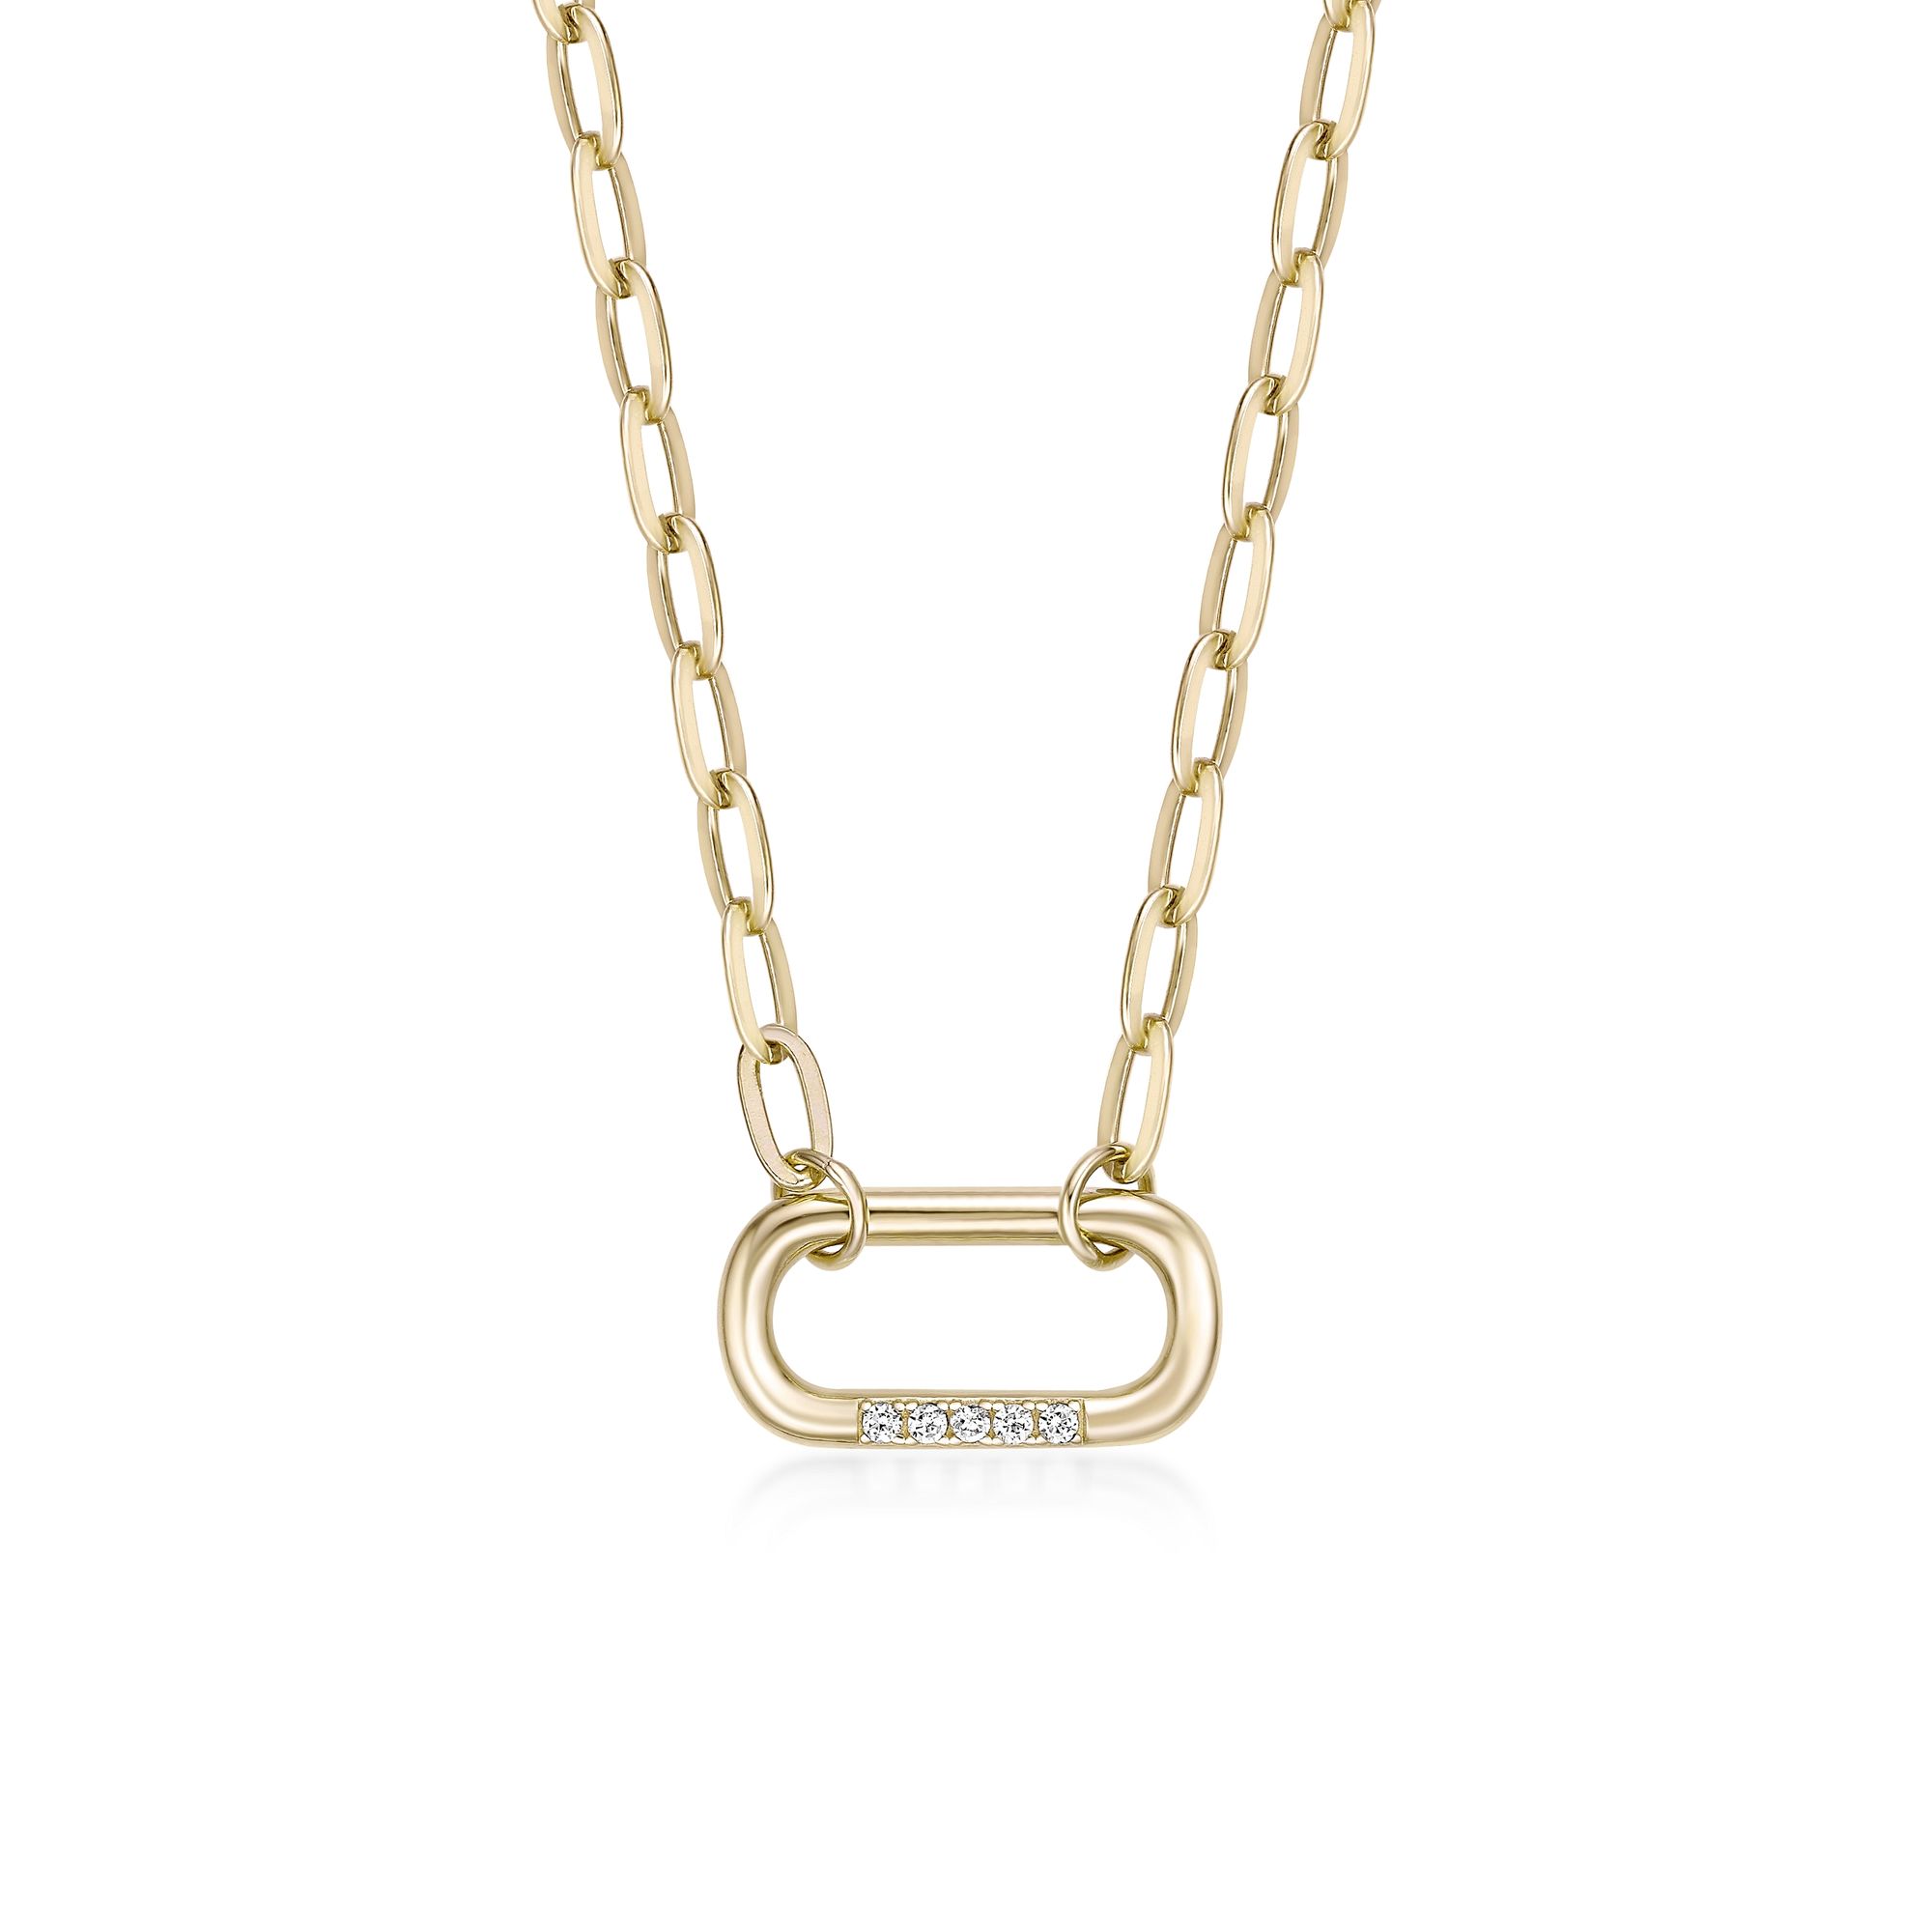 Women's Lab Grown Diamond Paperclip Necklace in 18K Yellow Gold-Plated Sterling Silver with Lobster Clasp, 0.04 Carat, 18" Link Chain | Lavari Jewelers